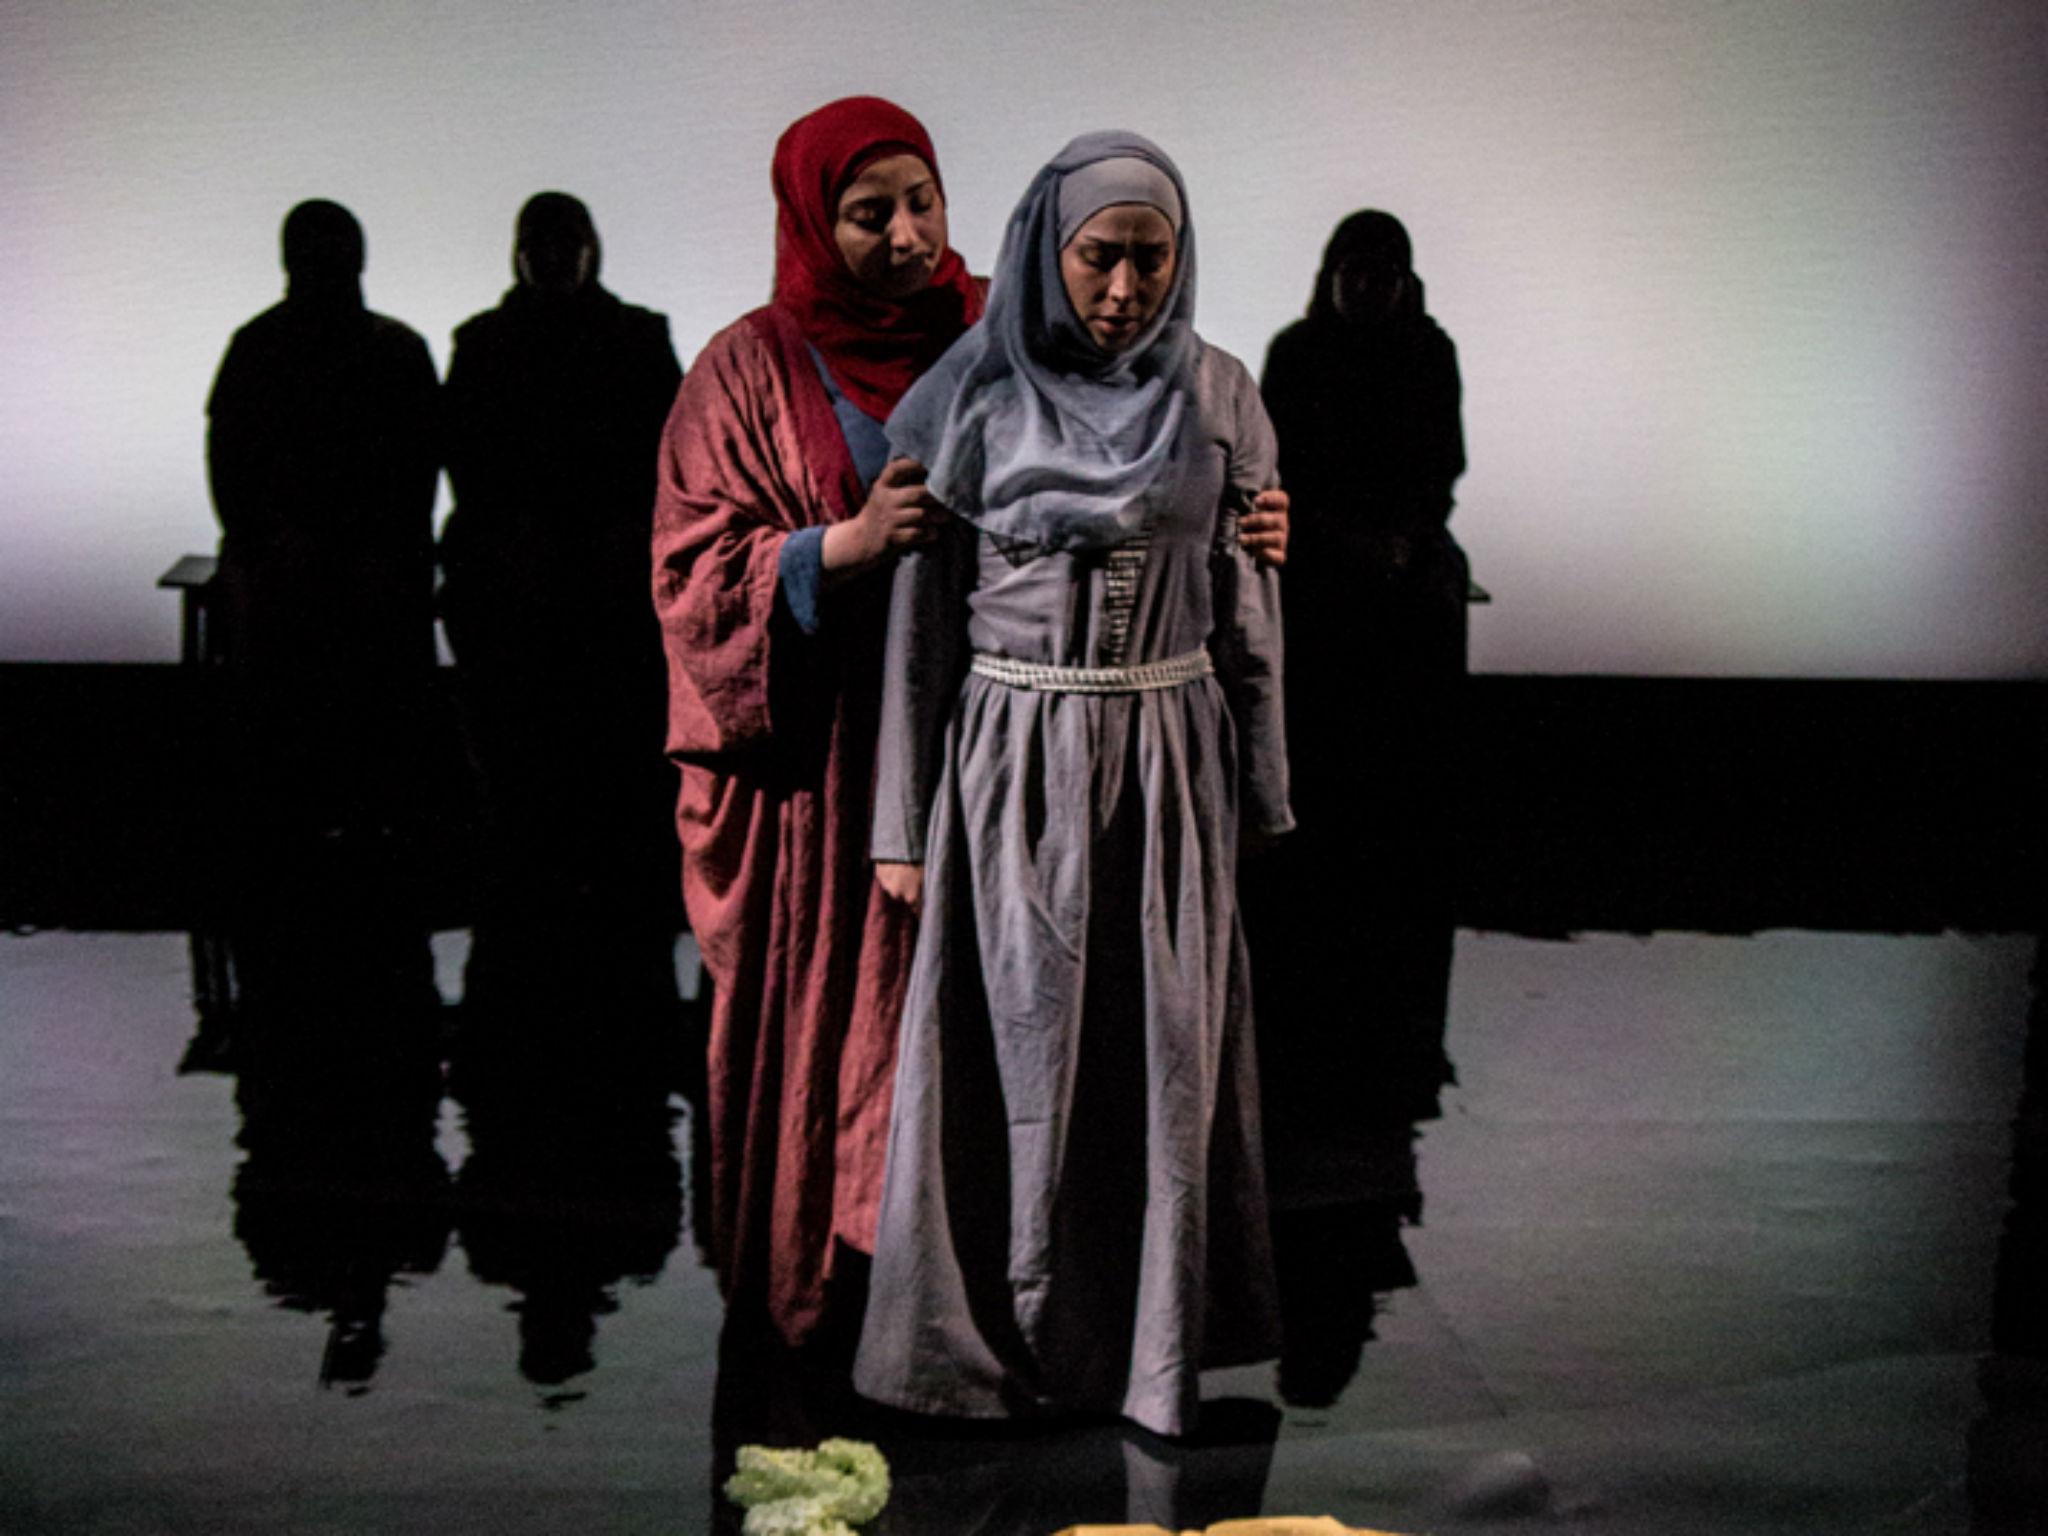 Syrian refugees perform their version of Women of Troy